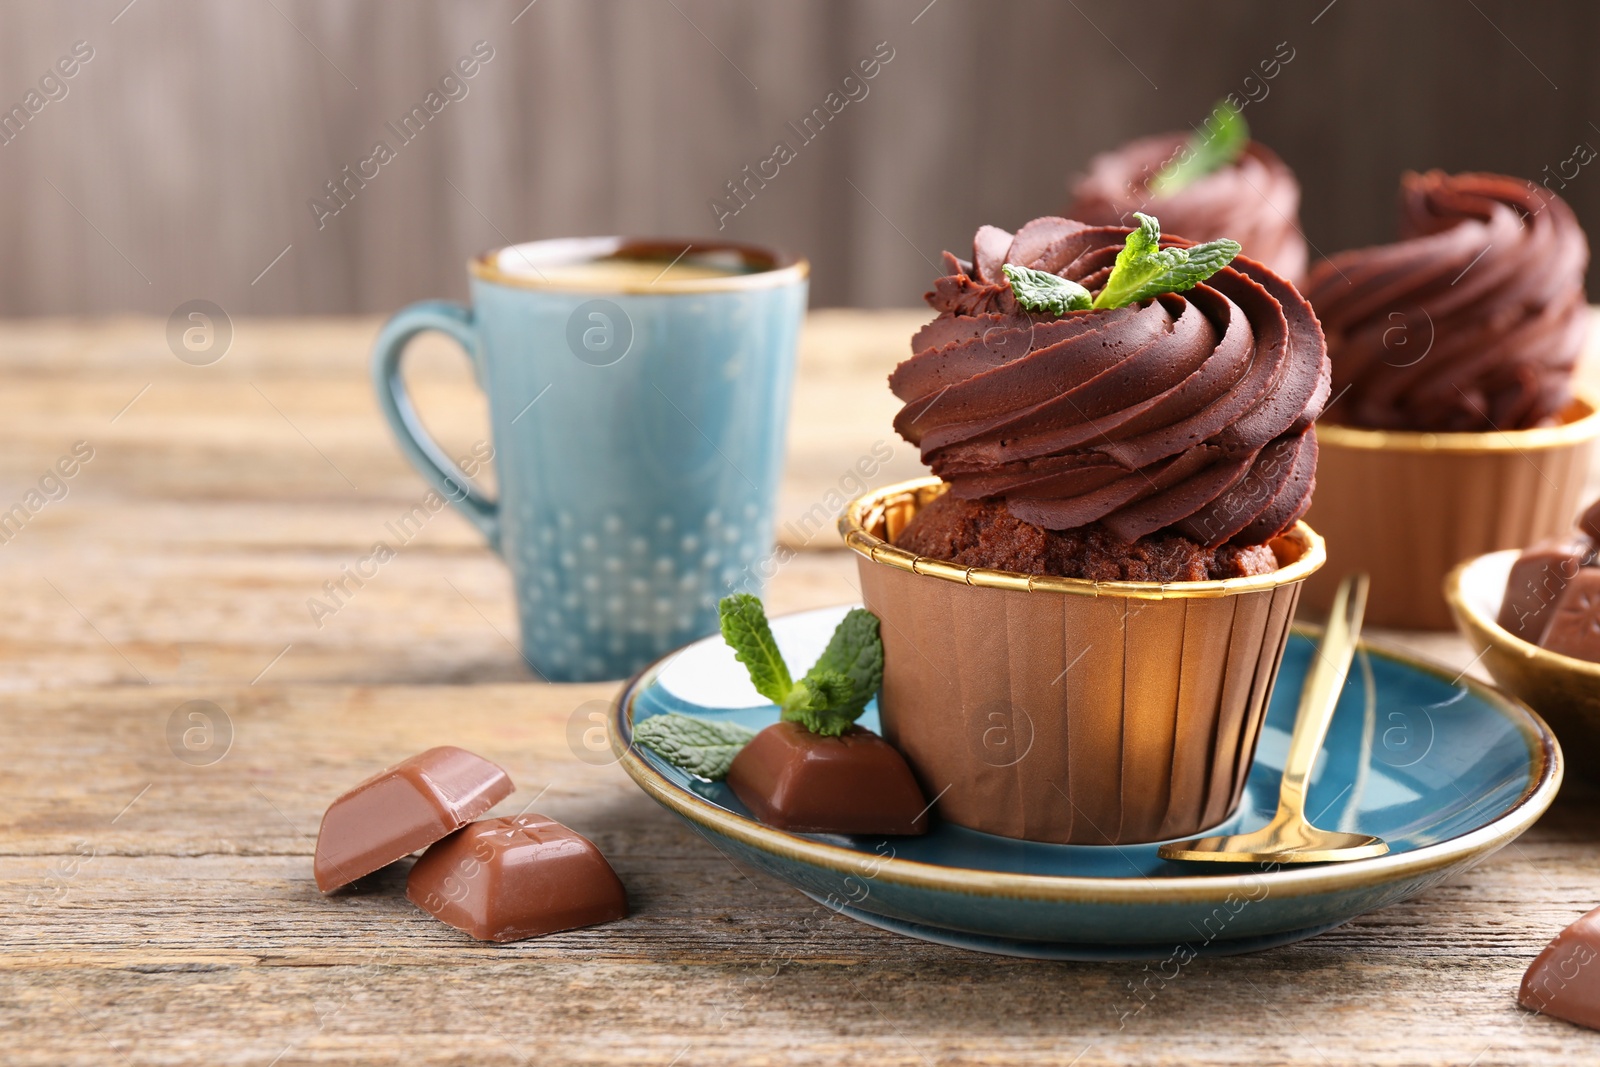 Photo of Delicious cupcake with mint and chocolate pieces on wooden table